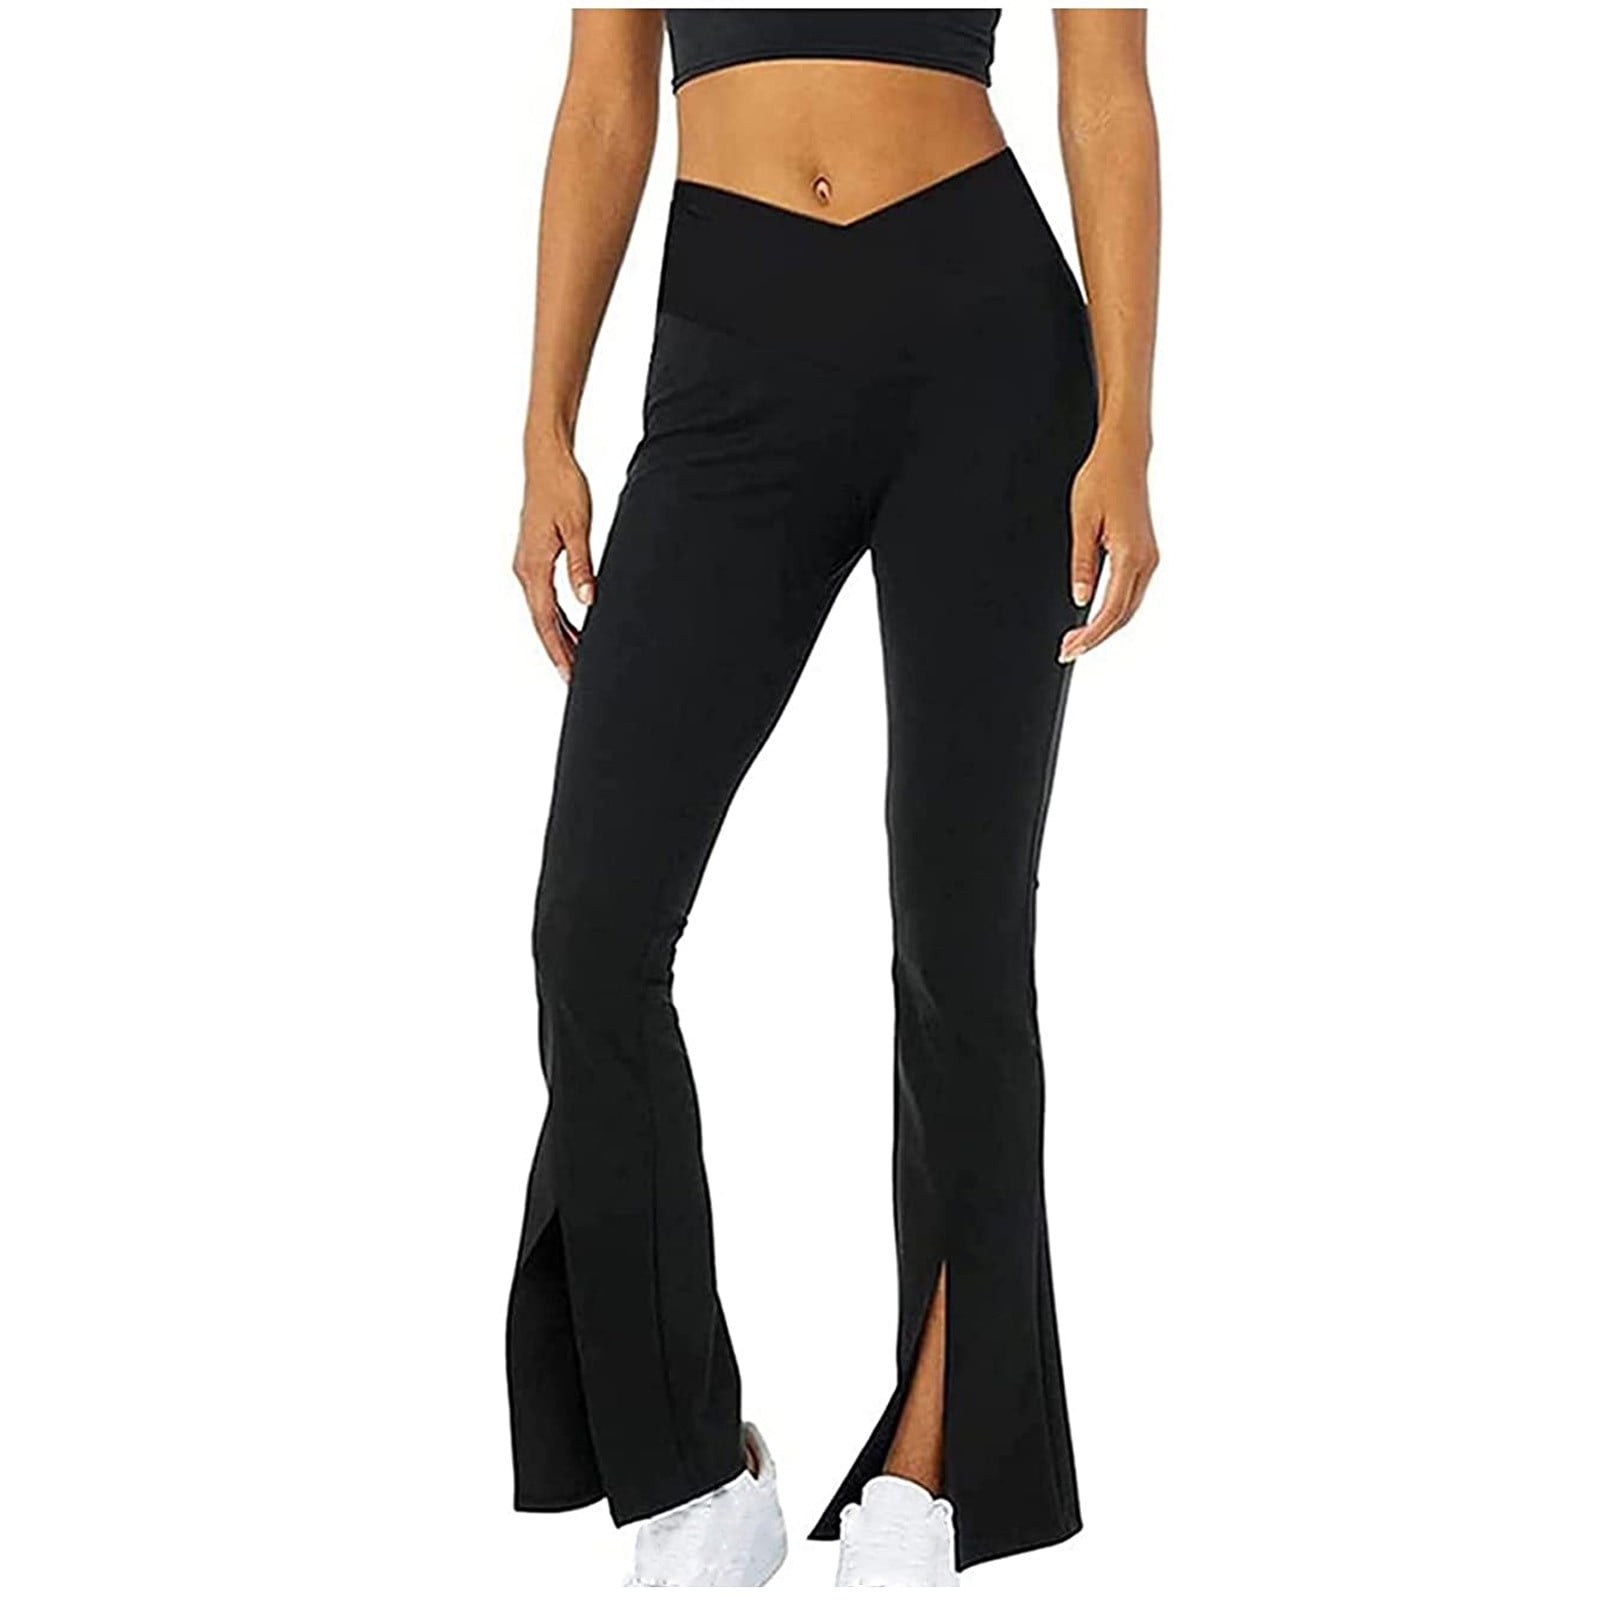  Womens Flared Leggings with Pockets Workout Bell Bottom Jazz  Dress Pants High Waisted Bootcut Athletic Yoga Pants : Sports & Outdoors